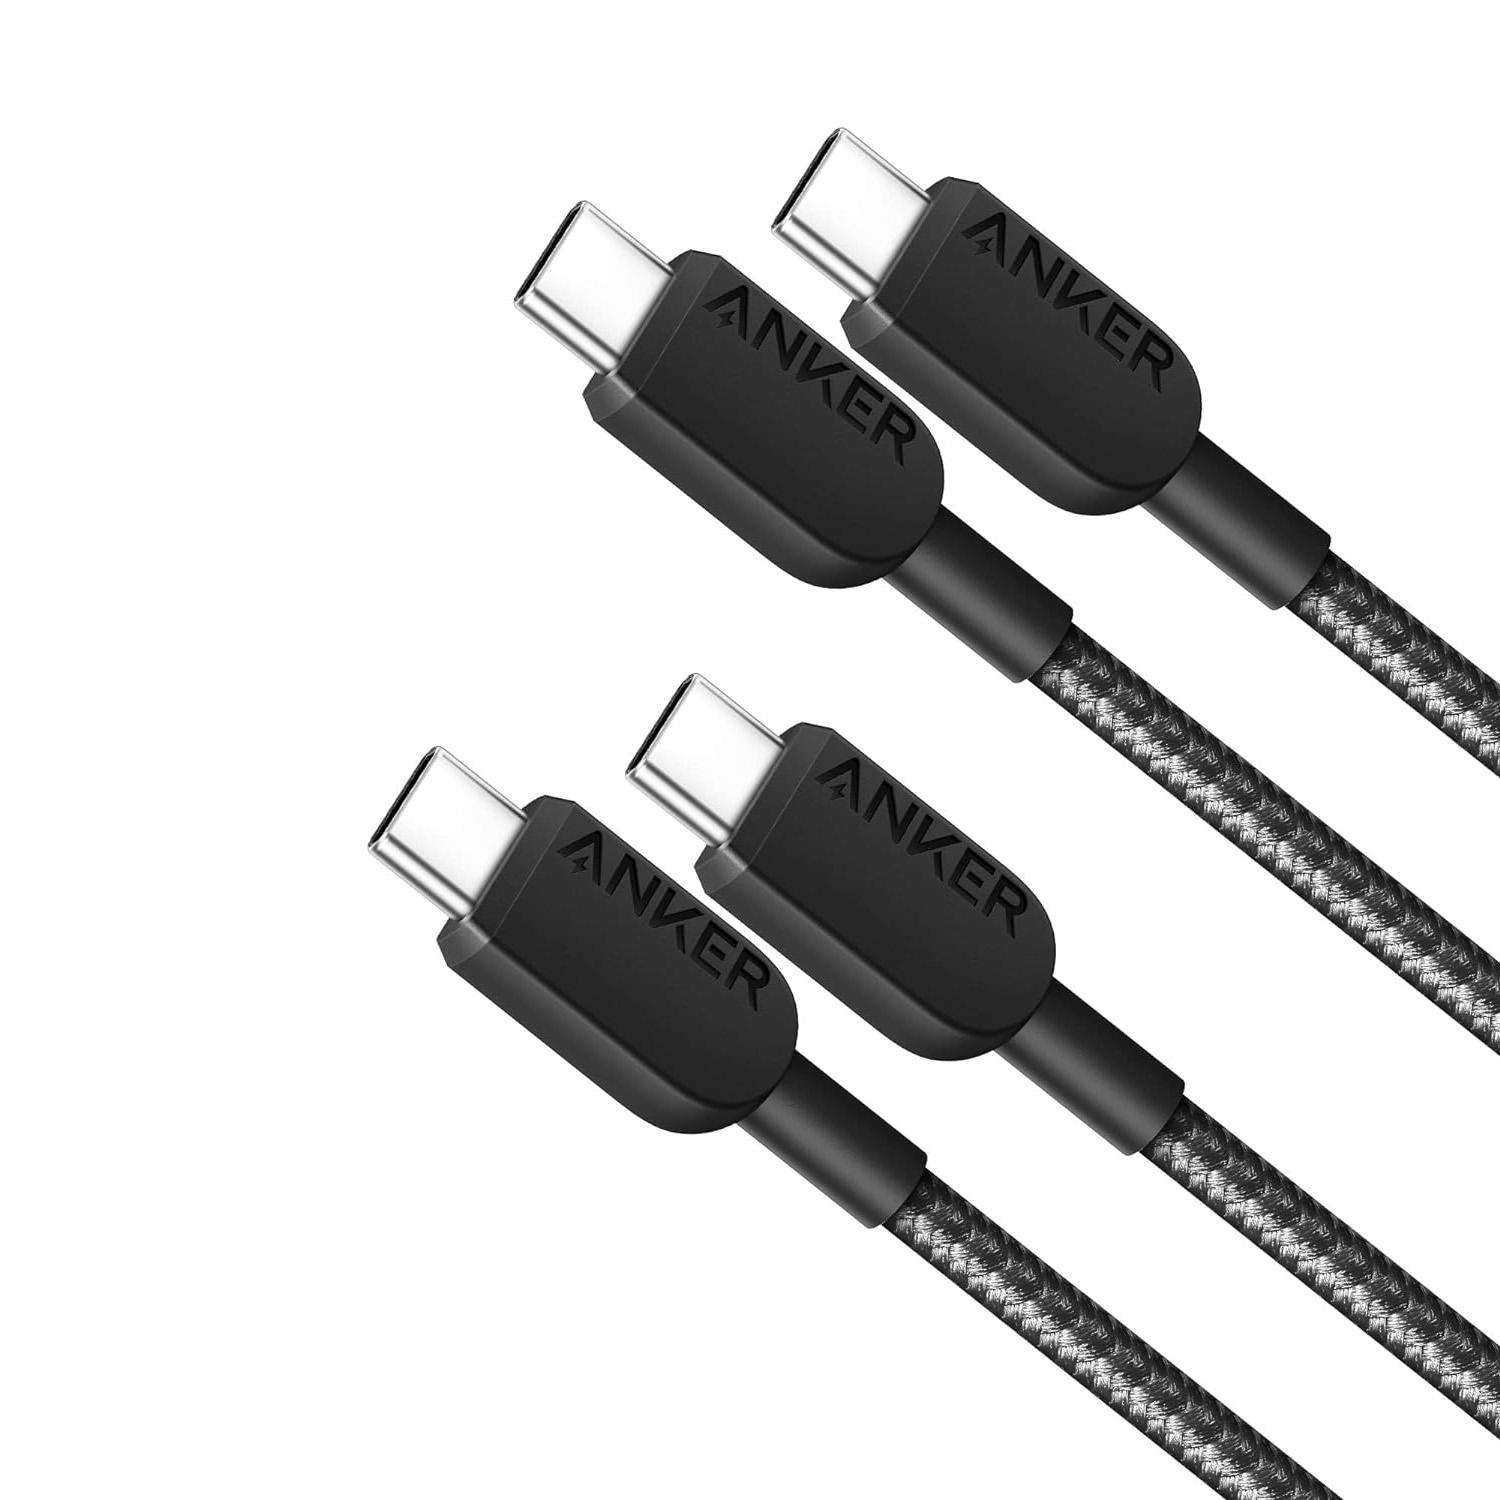 Anker 310 USB C to USB-C 3ft Cables 2 Pack for $5.99